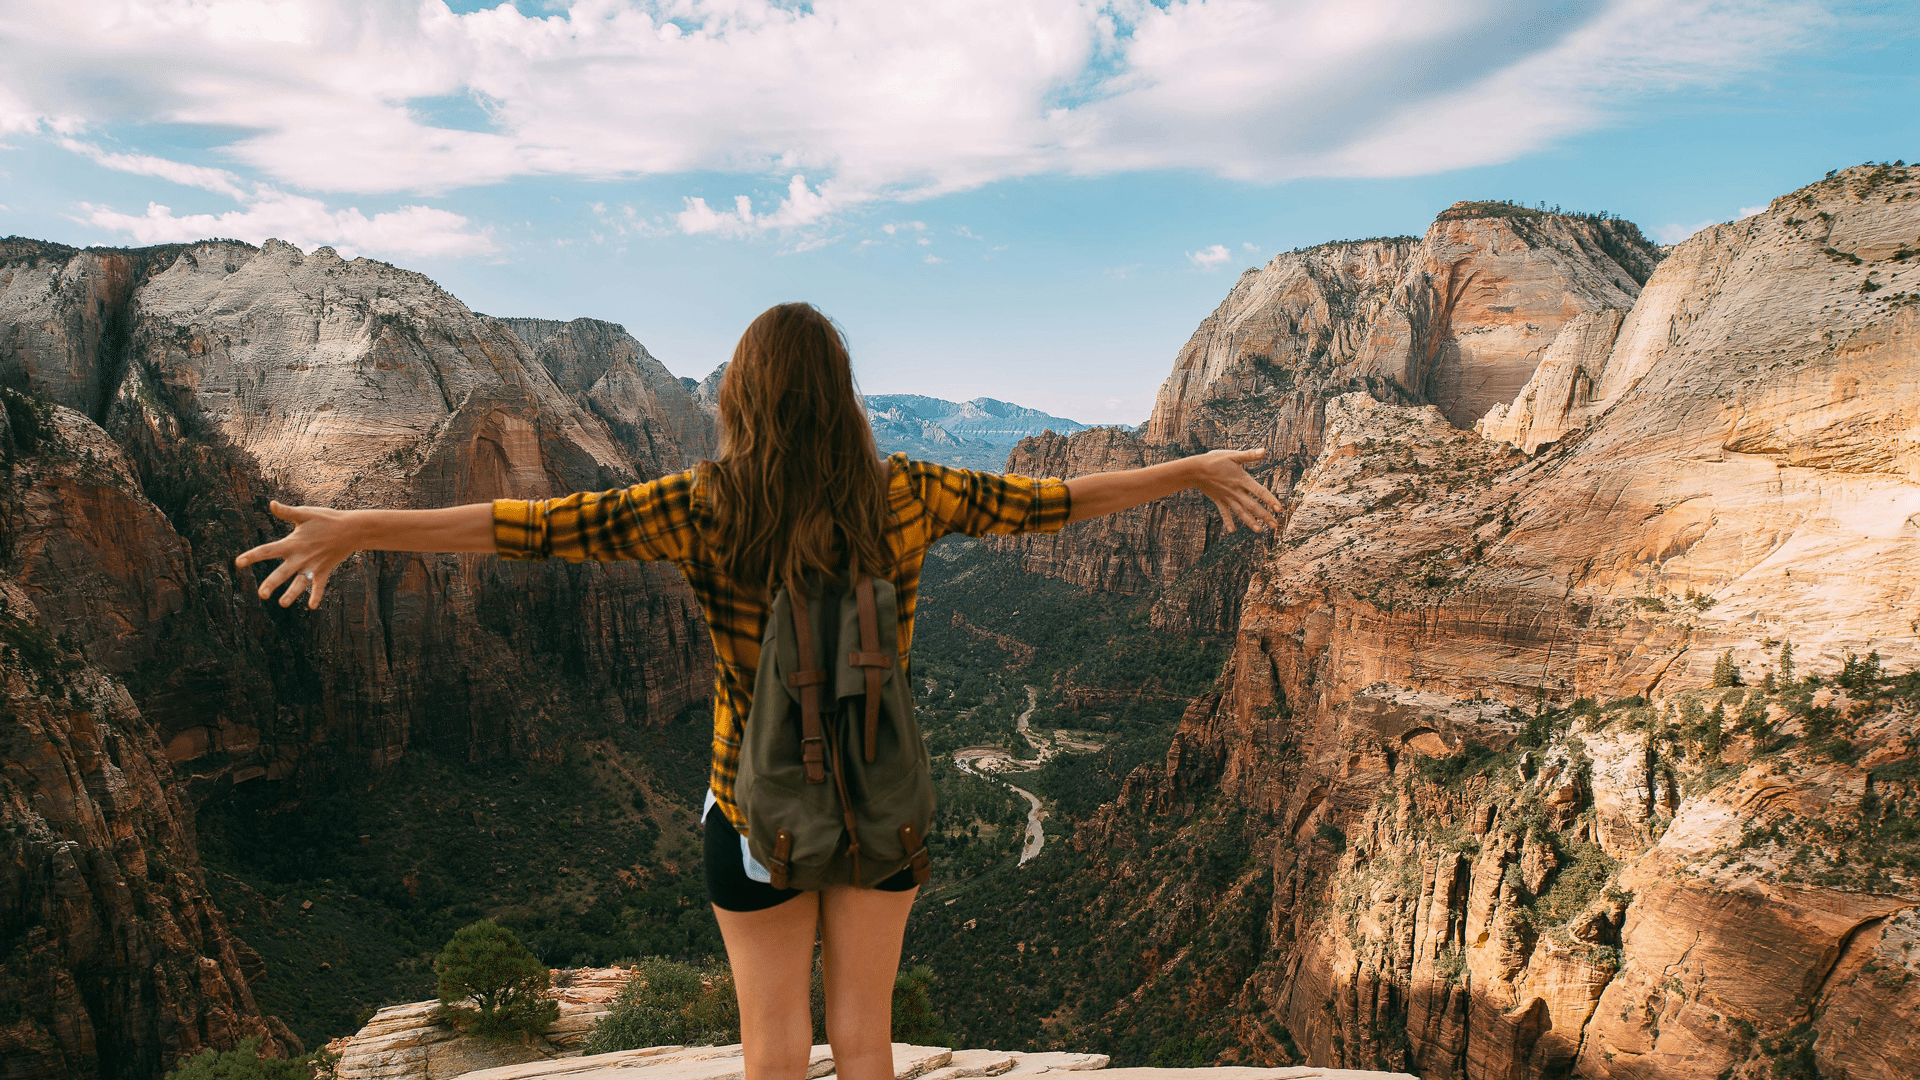 Person with their hands up standing on top of mountain